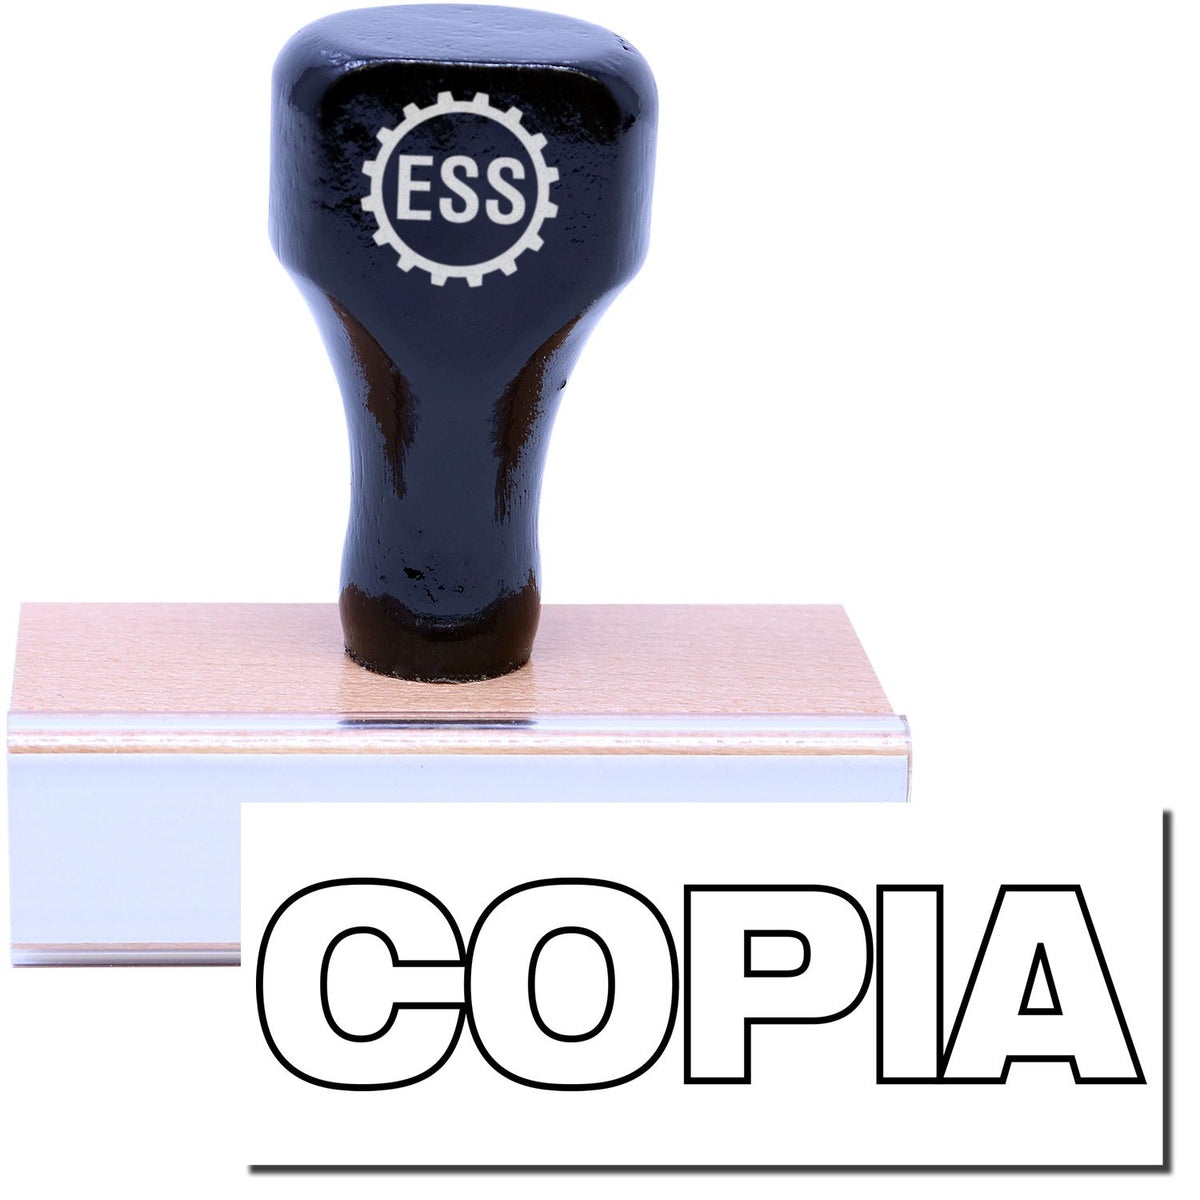 A stock office rubber stamp with a stamped image showing how the text &quot;COPIA&quot; in a large outline font is displayed after stamping.